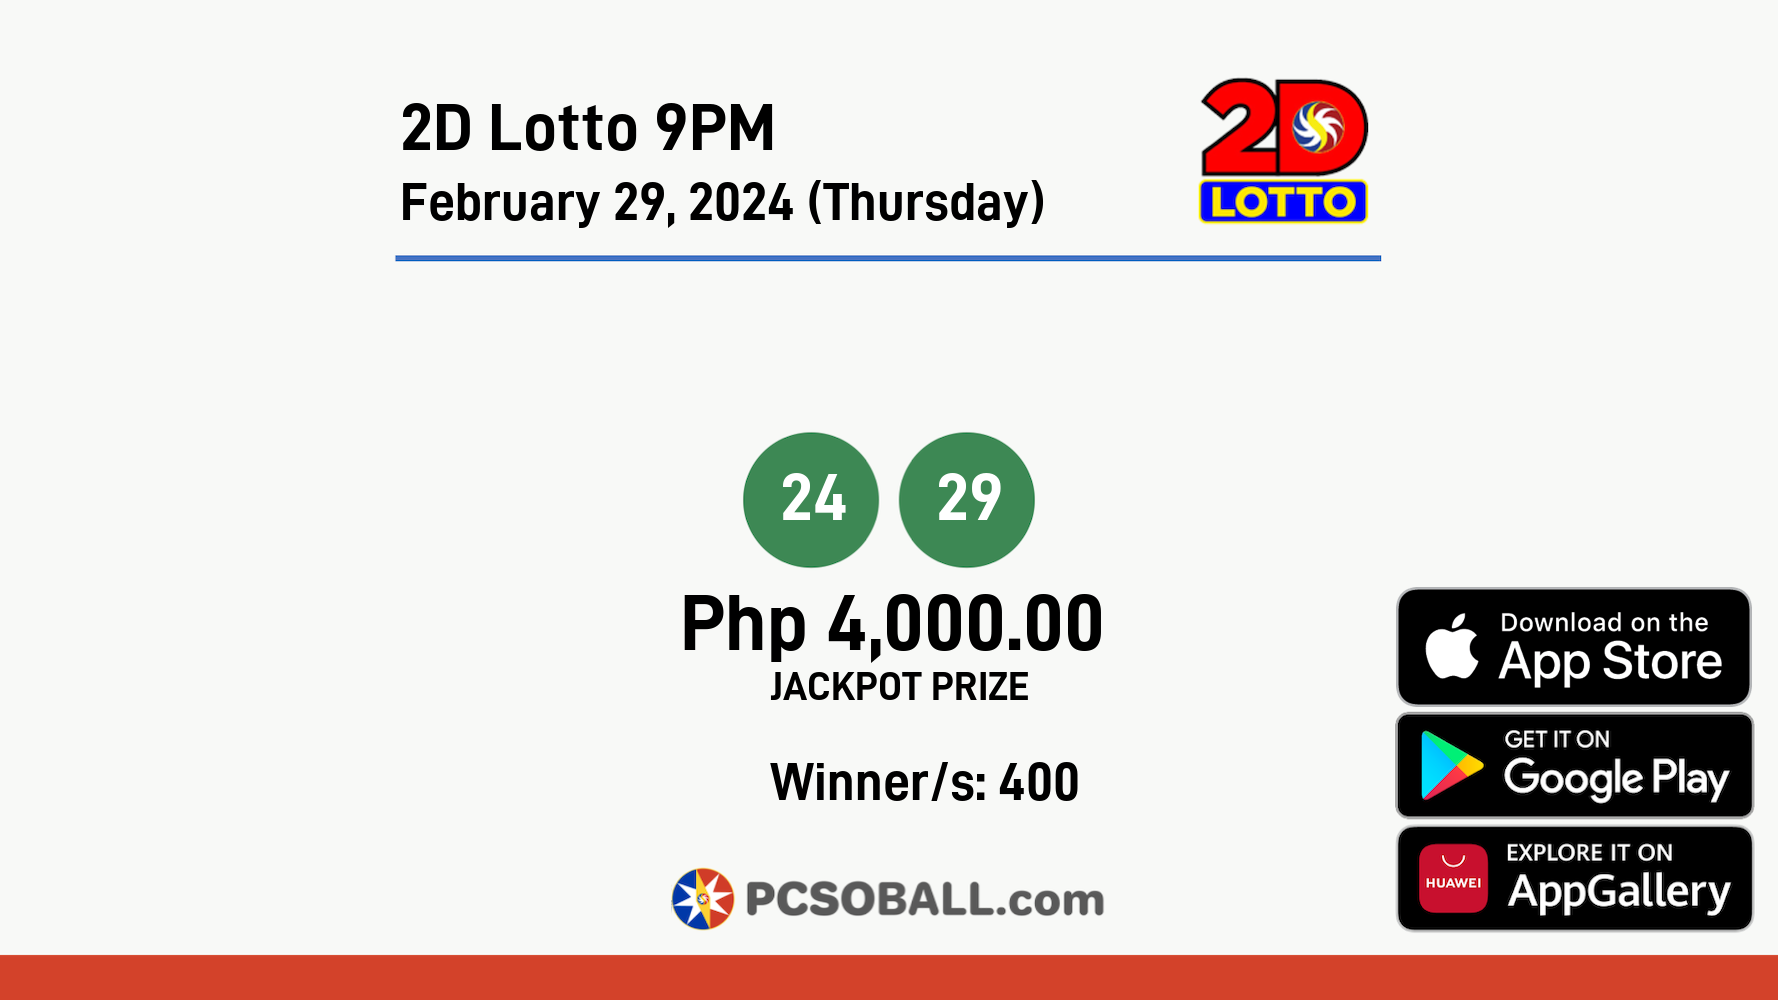 2D Lotto 9PM February 29, 2024 (Thursday) Result